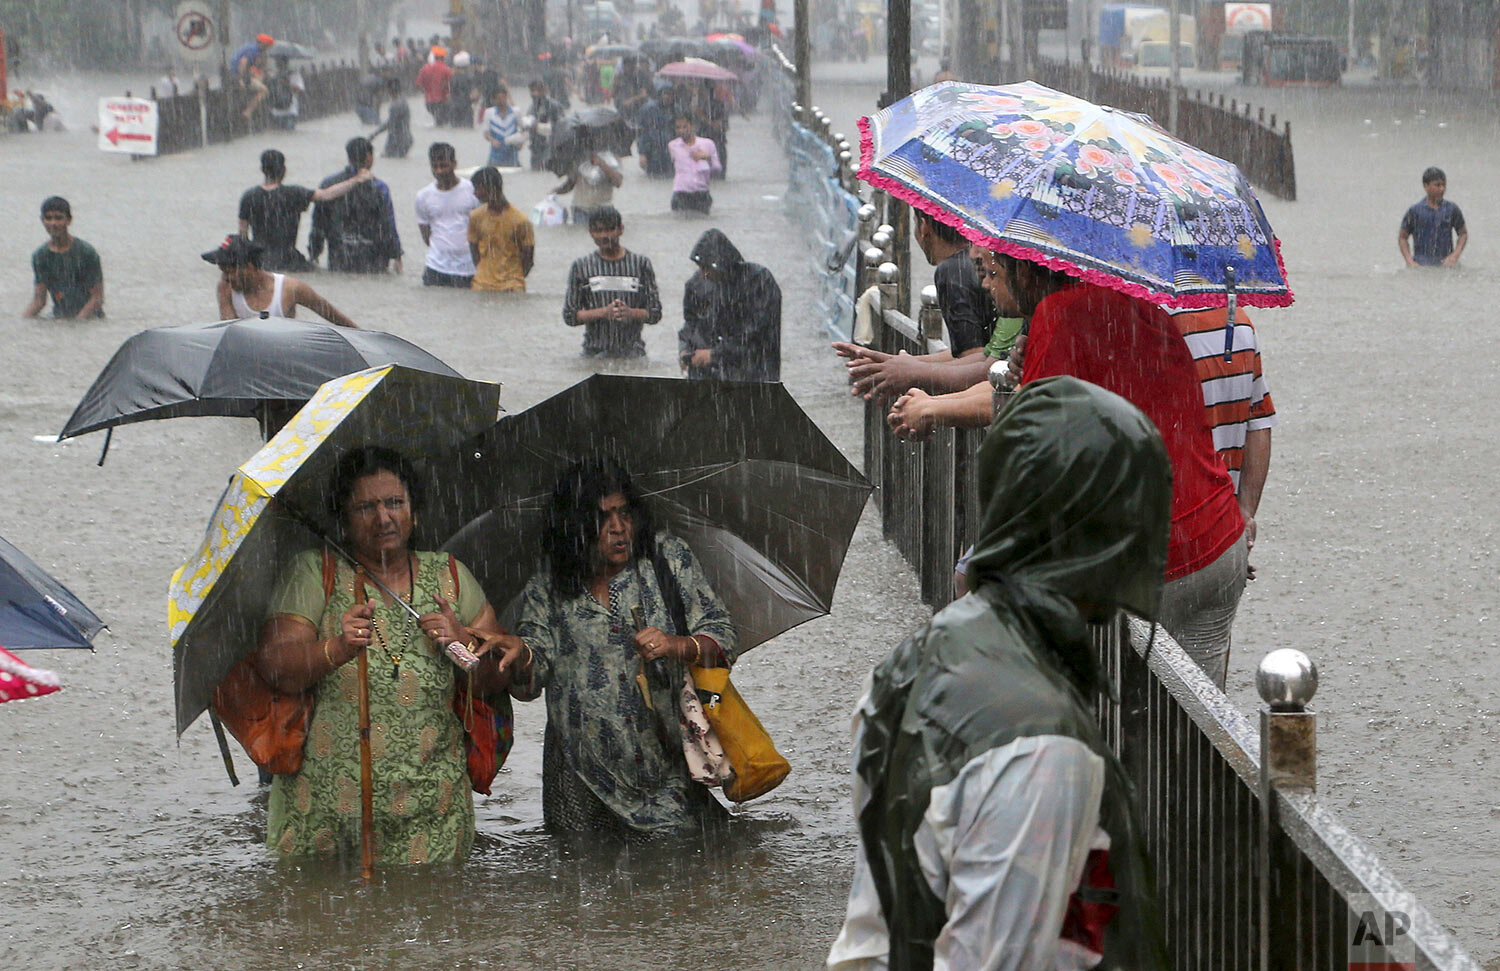  People navigate their way through a street flooded by torrential rains in Mumbai, India, on Sept. 4, 2019. (AP Photo/Rajanish Kakade) 